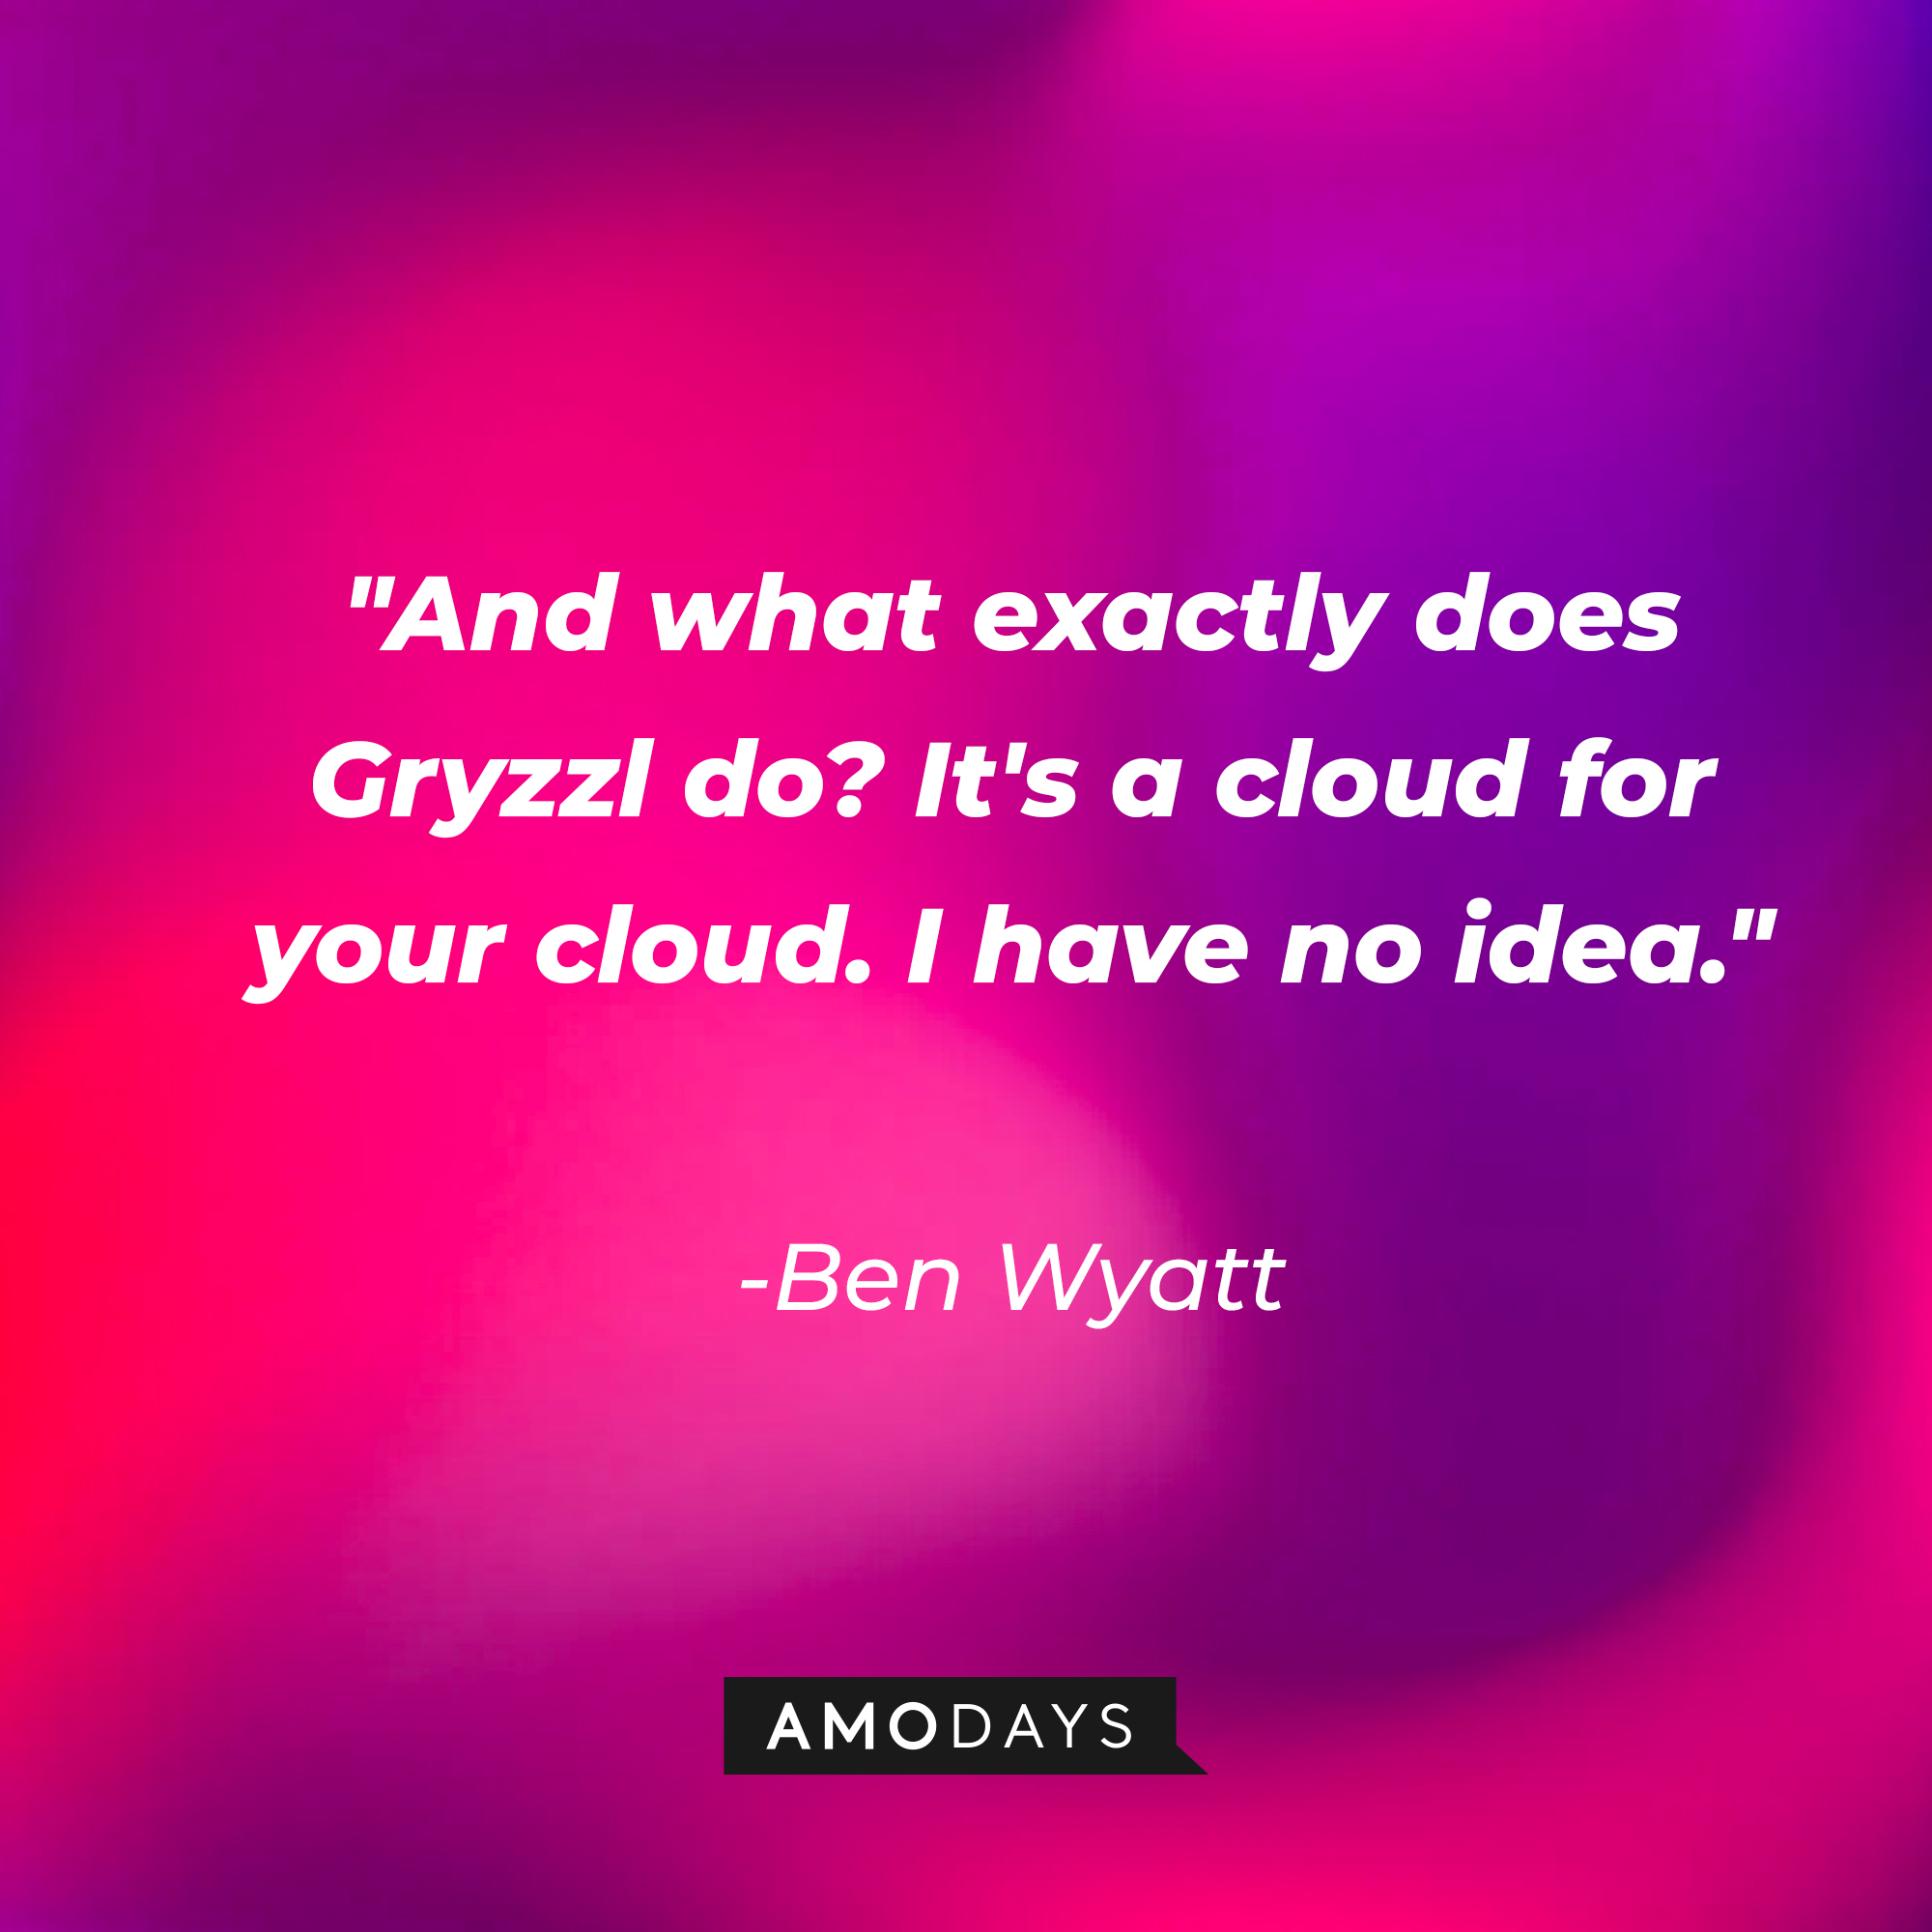 Ben Wyatt's quote: "And what exactly does Gryzzl do? It's a cloud for your cloud. I have no idea." | Source: AmoDays